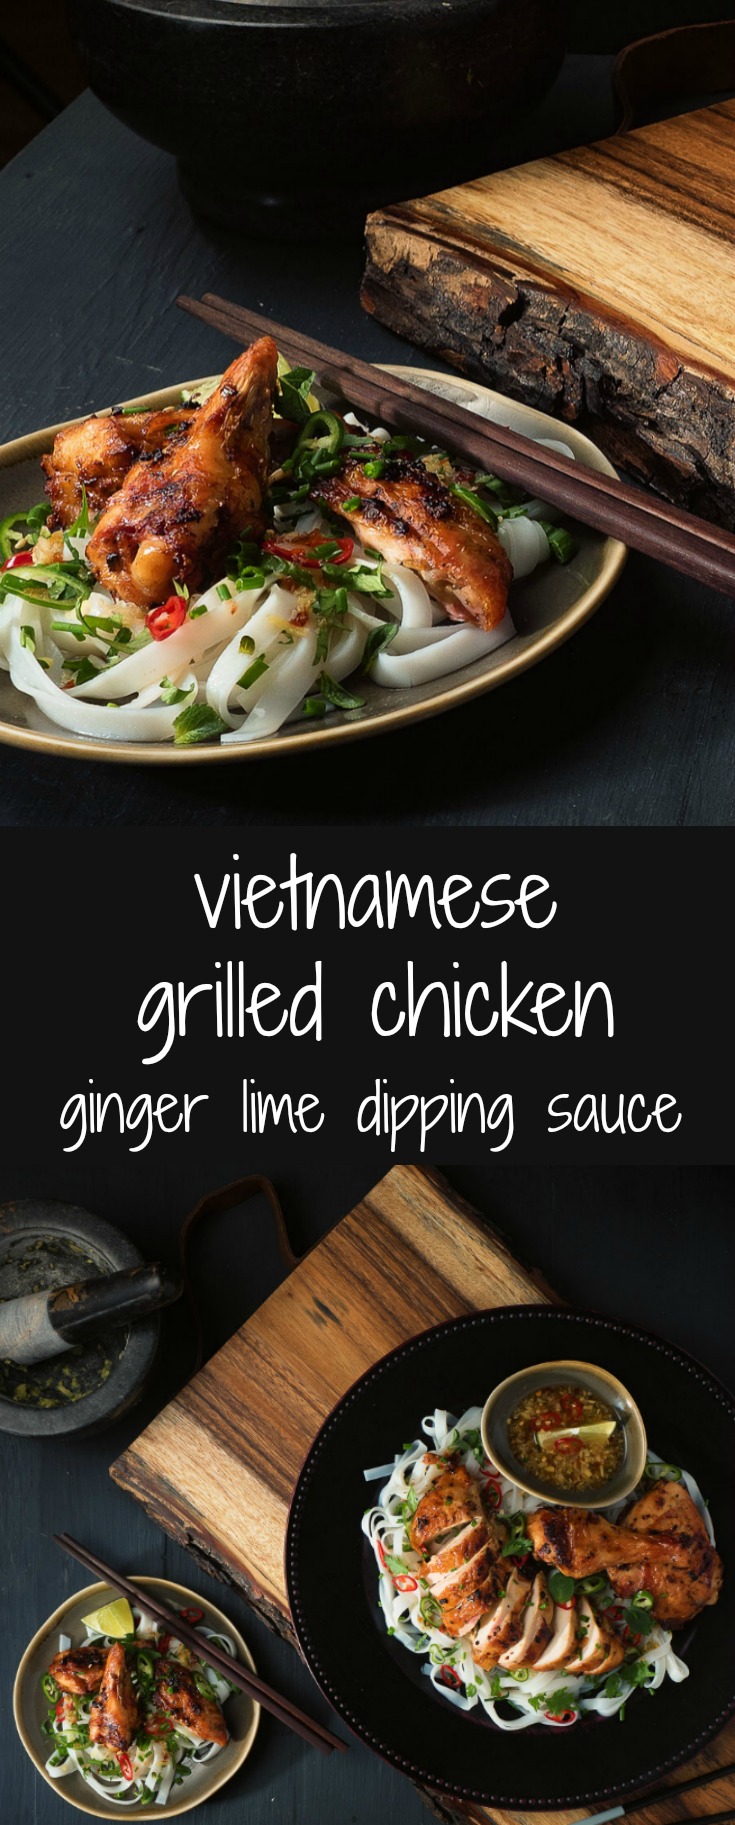 Citrus flavours pair beautifully with ginger, green chili, and garlic in this salty sweet Vietnamese grilled chicken.